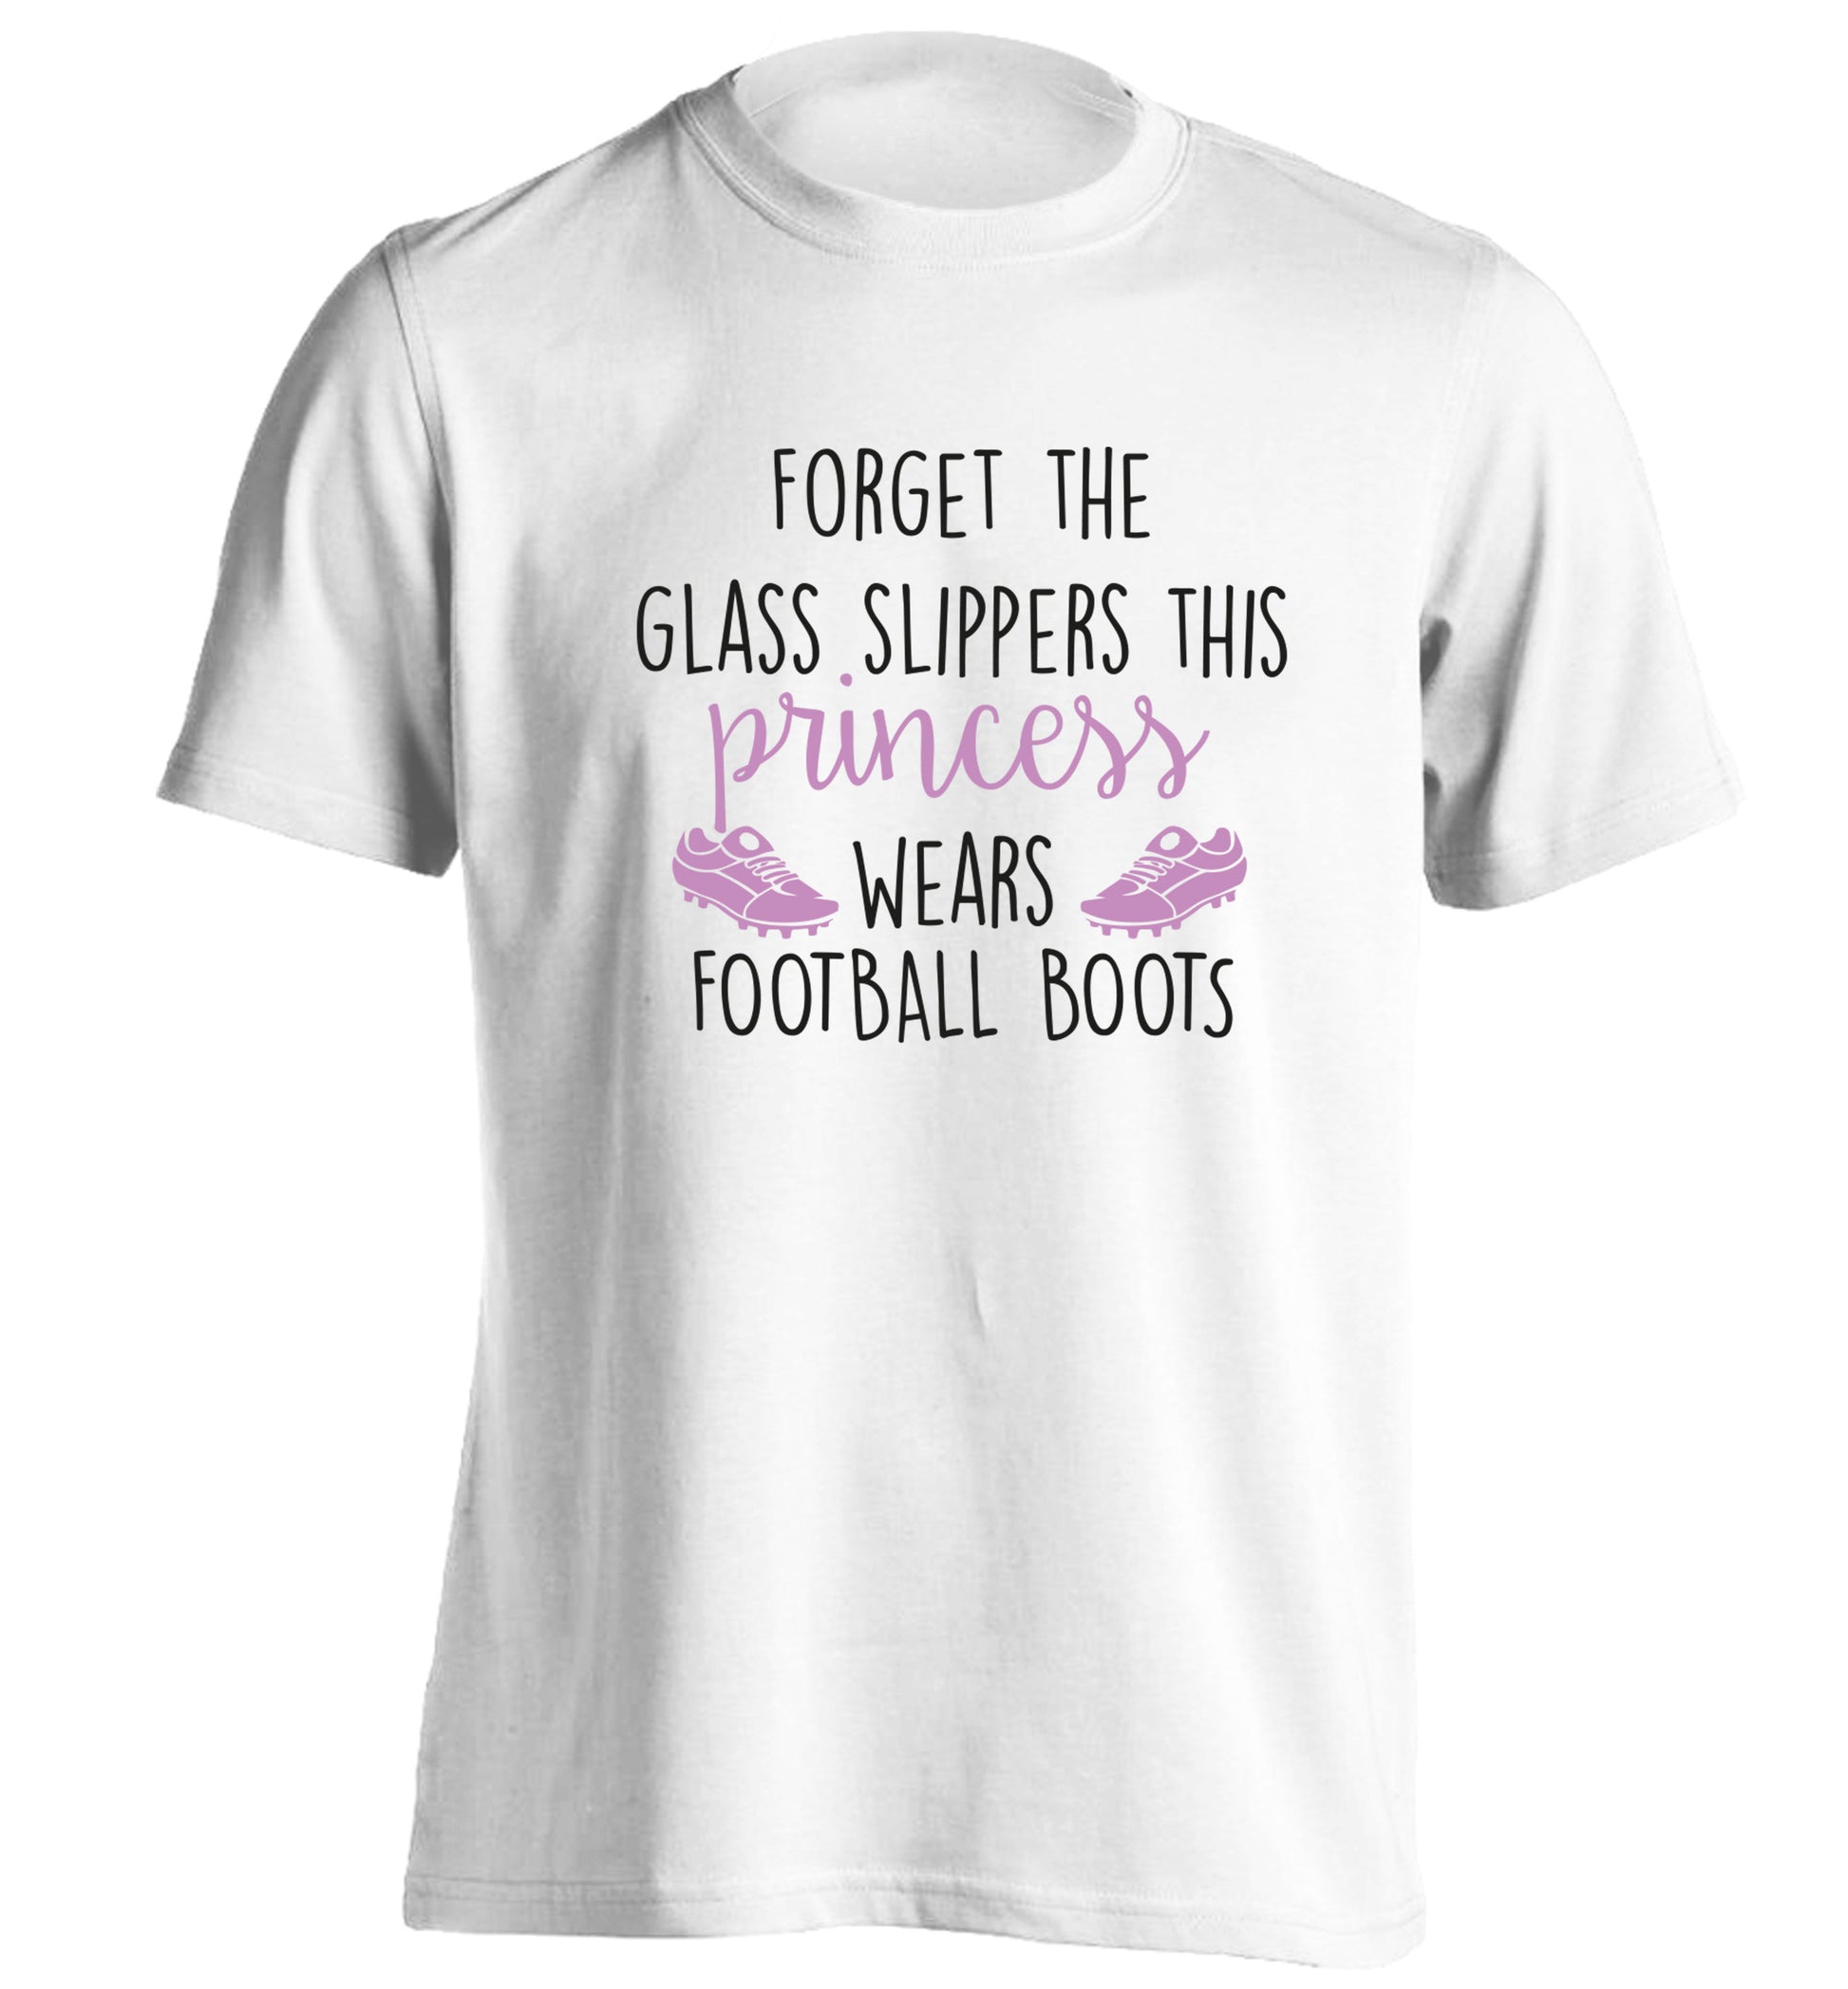 Forget the glass slippers this princess wears football boots adults unisex white Tshirt 2XL